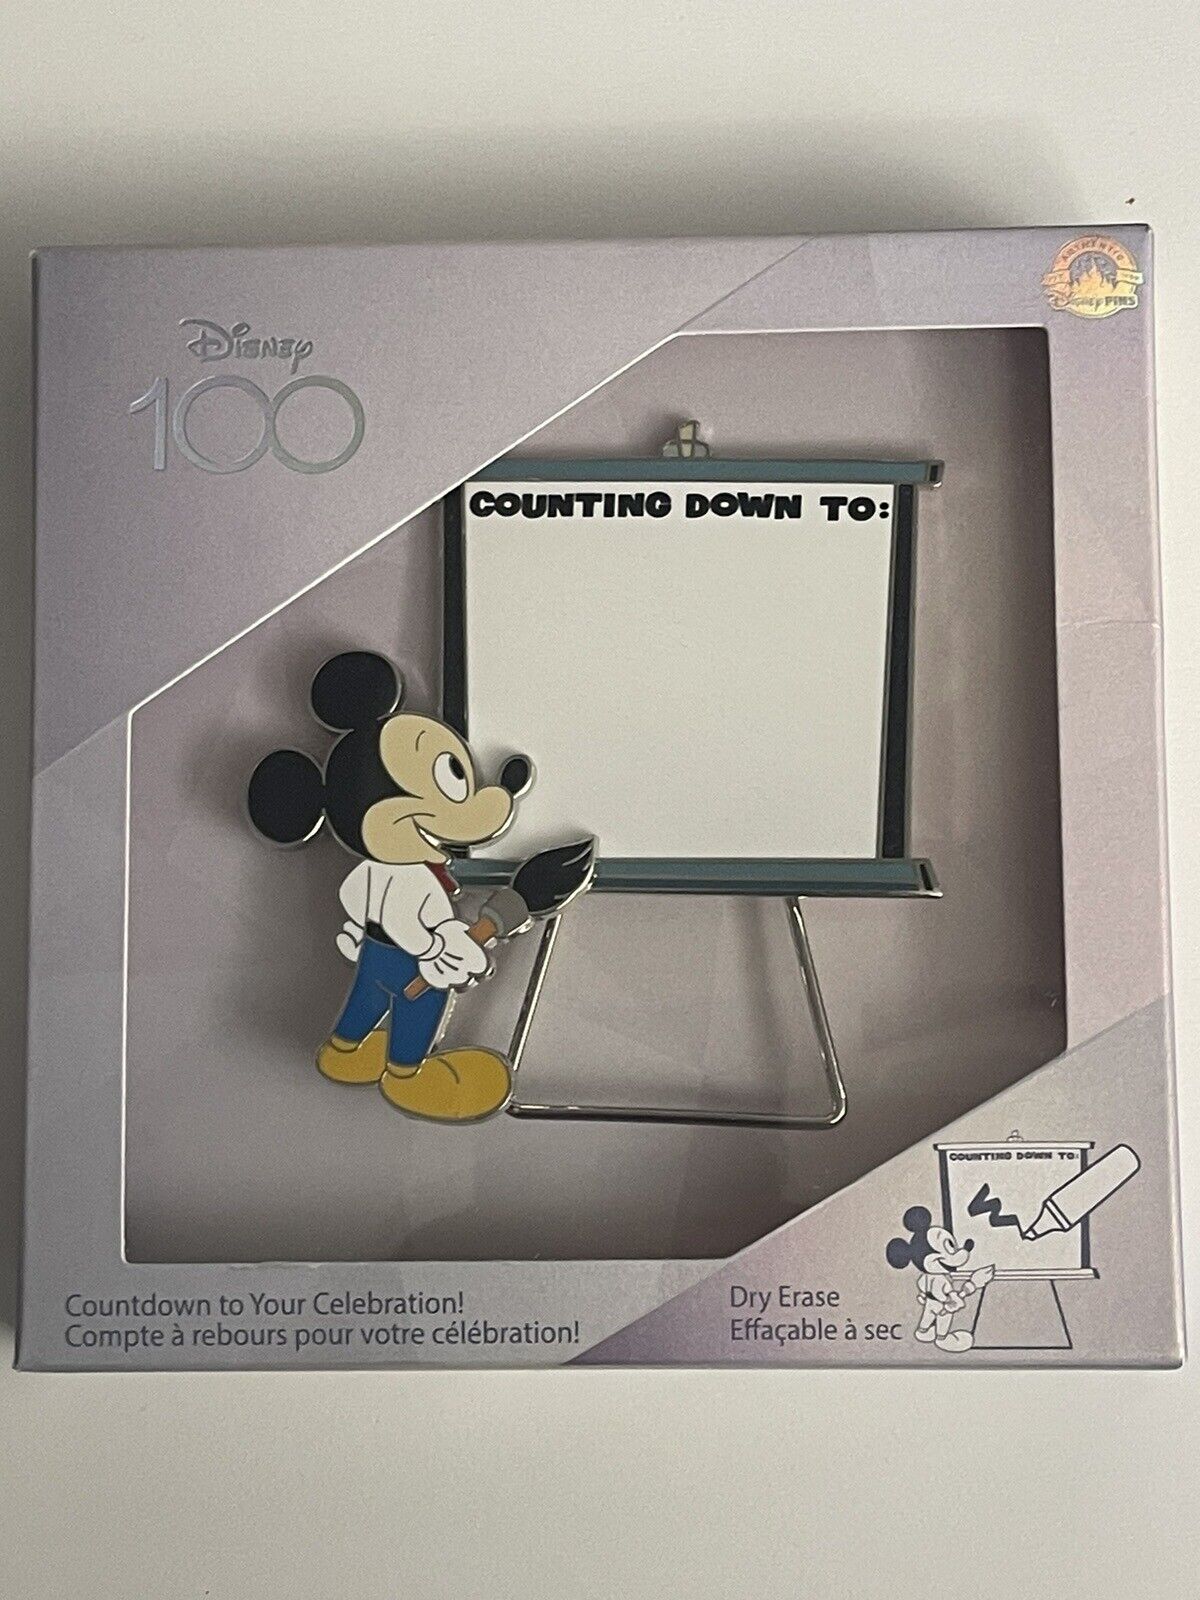 Mickey Pin - Disney 100 Counting Down To: Dry Erase Pin Brand New Authentic